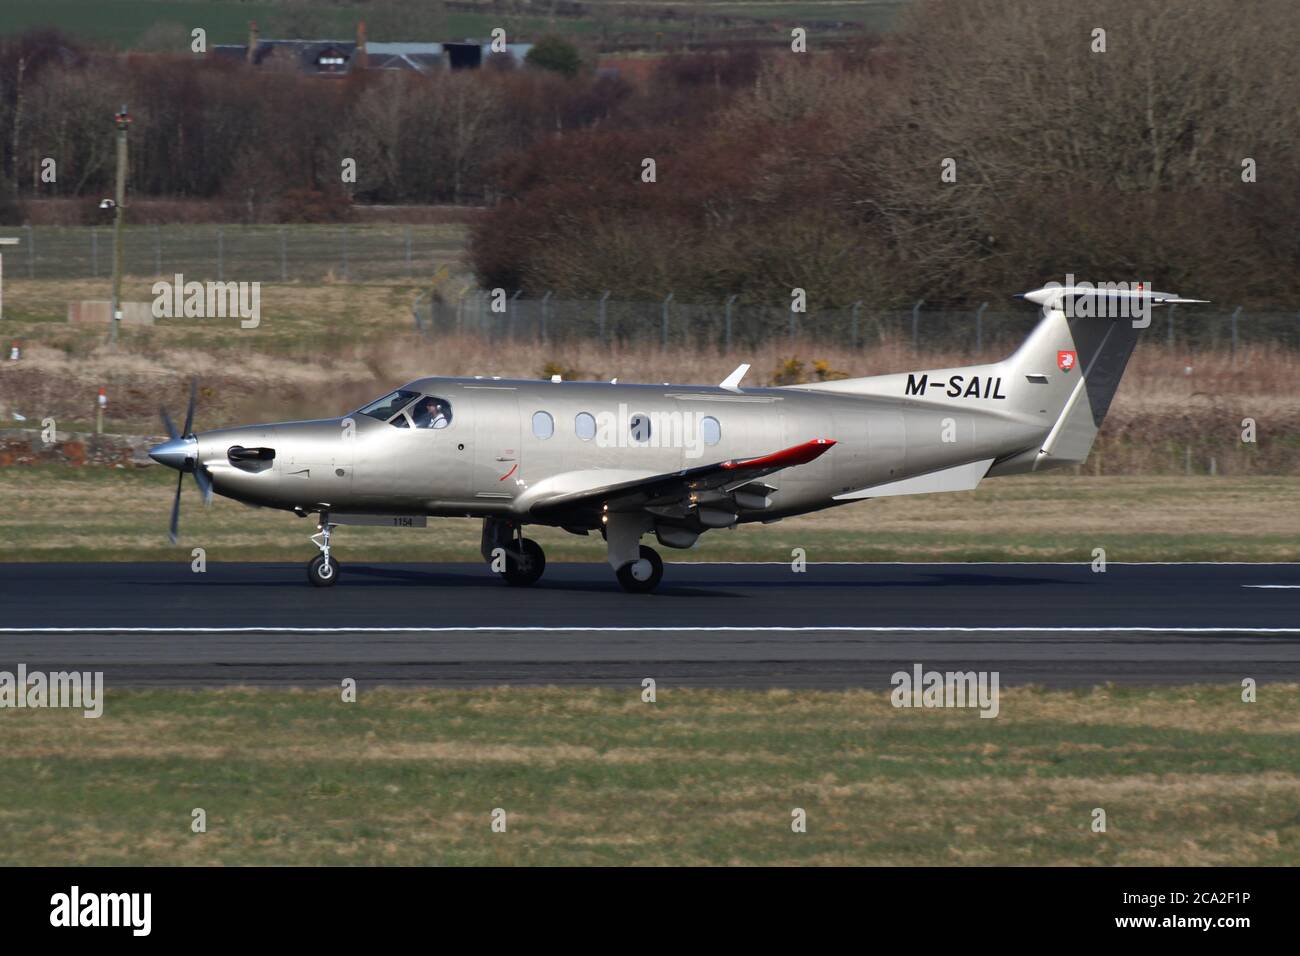 M-SAIL, a privately-owned Pilatus PC-12/47E, landing at Prestwick Airport in Ayrshire, Scotland. Stock Photo